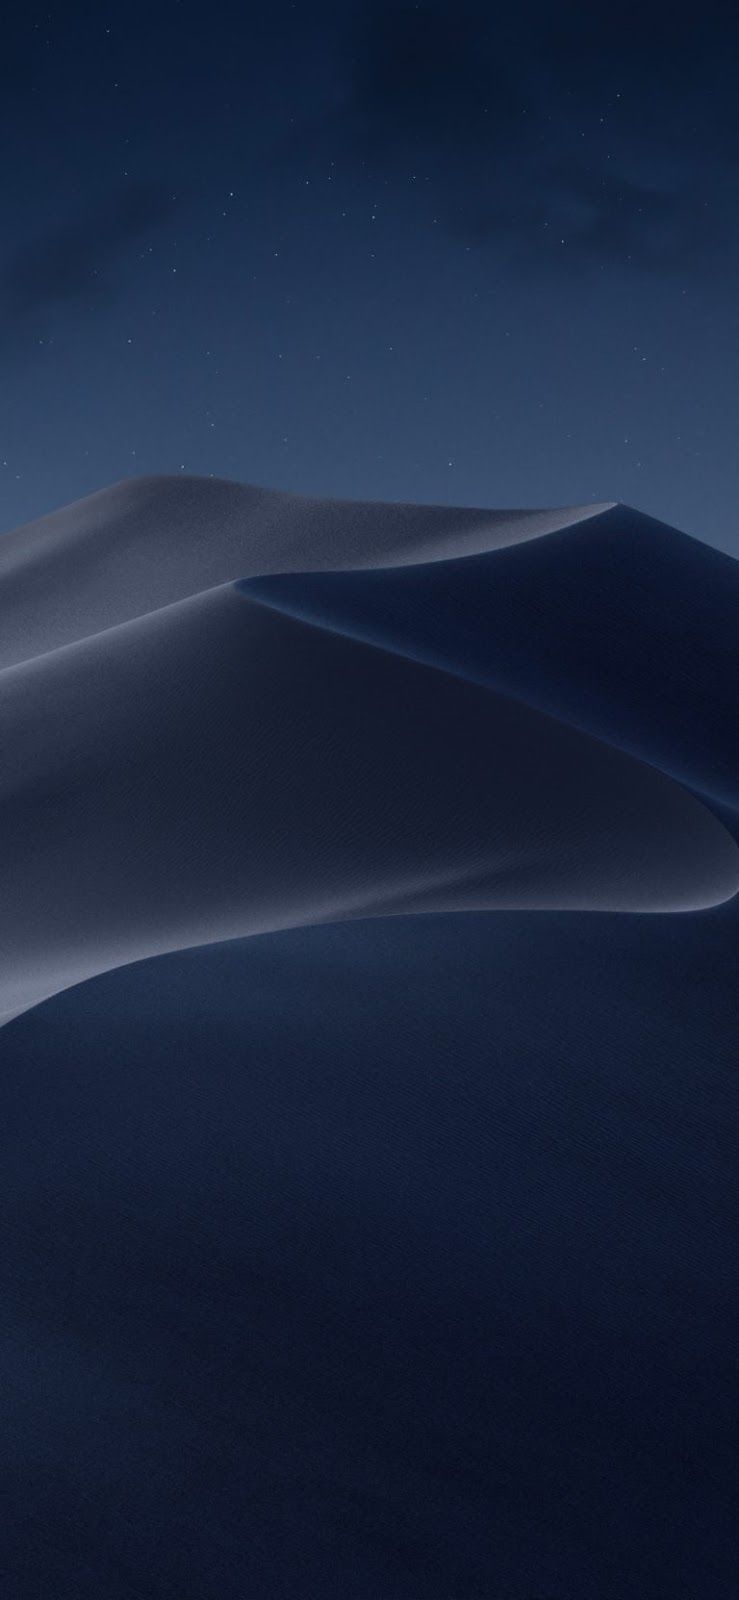 Download The Macos - Macos Mojave Wallpaper Iphone , HD Wallpaper & Backgrounds